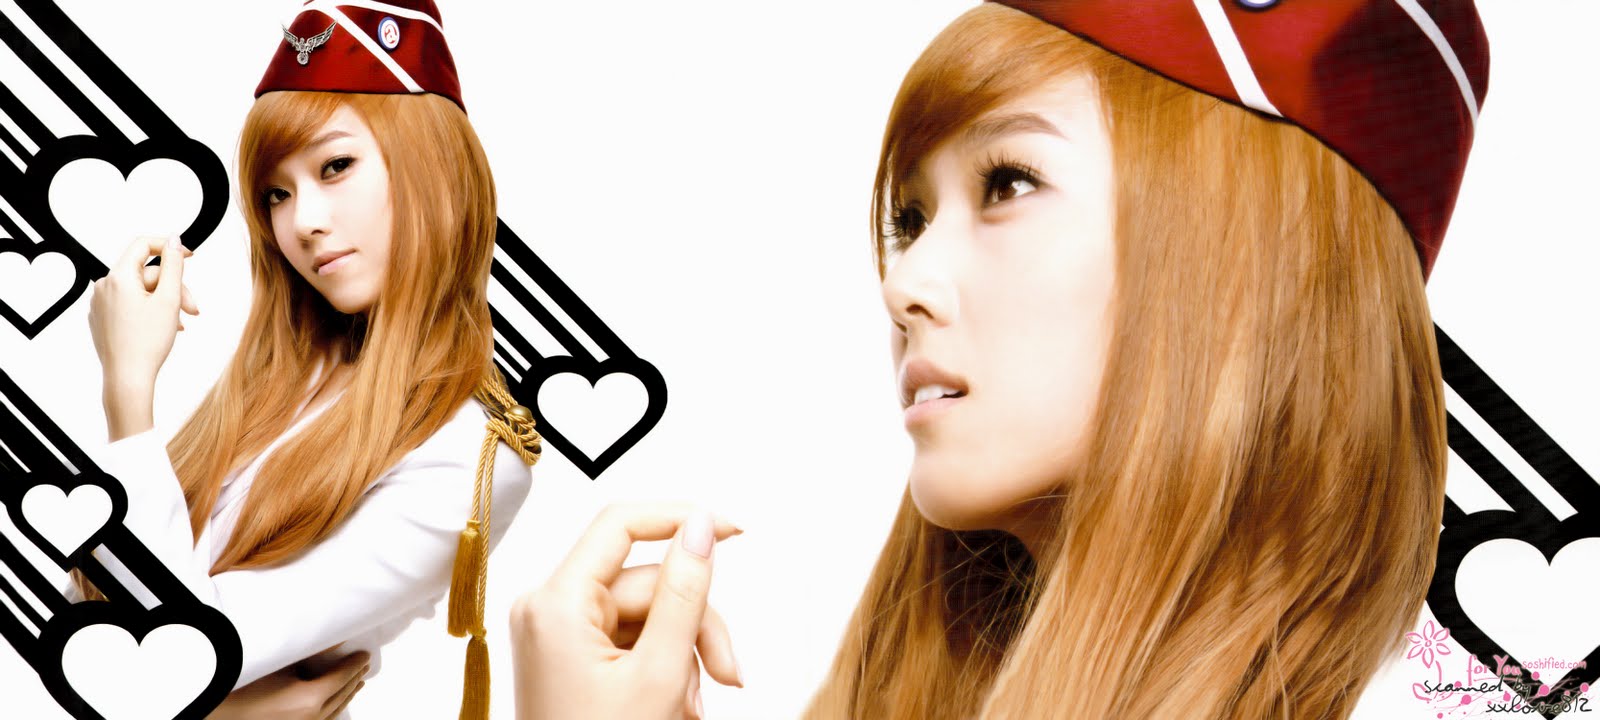 Jessica Snsd Tell Me Your Wish - HD Wallpaper 